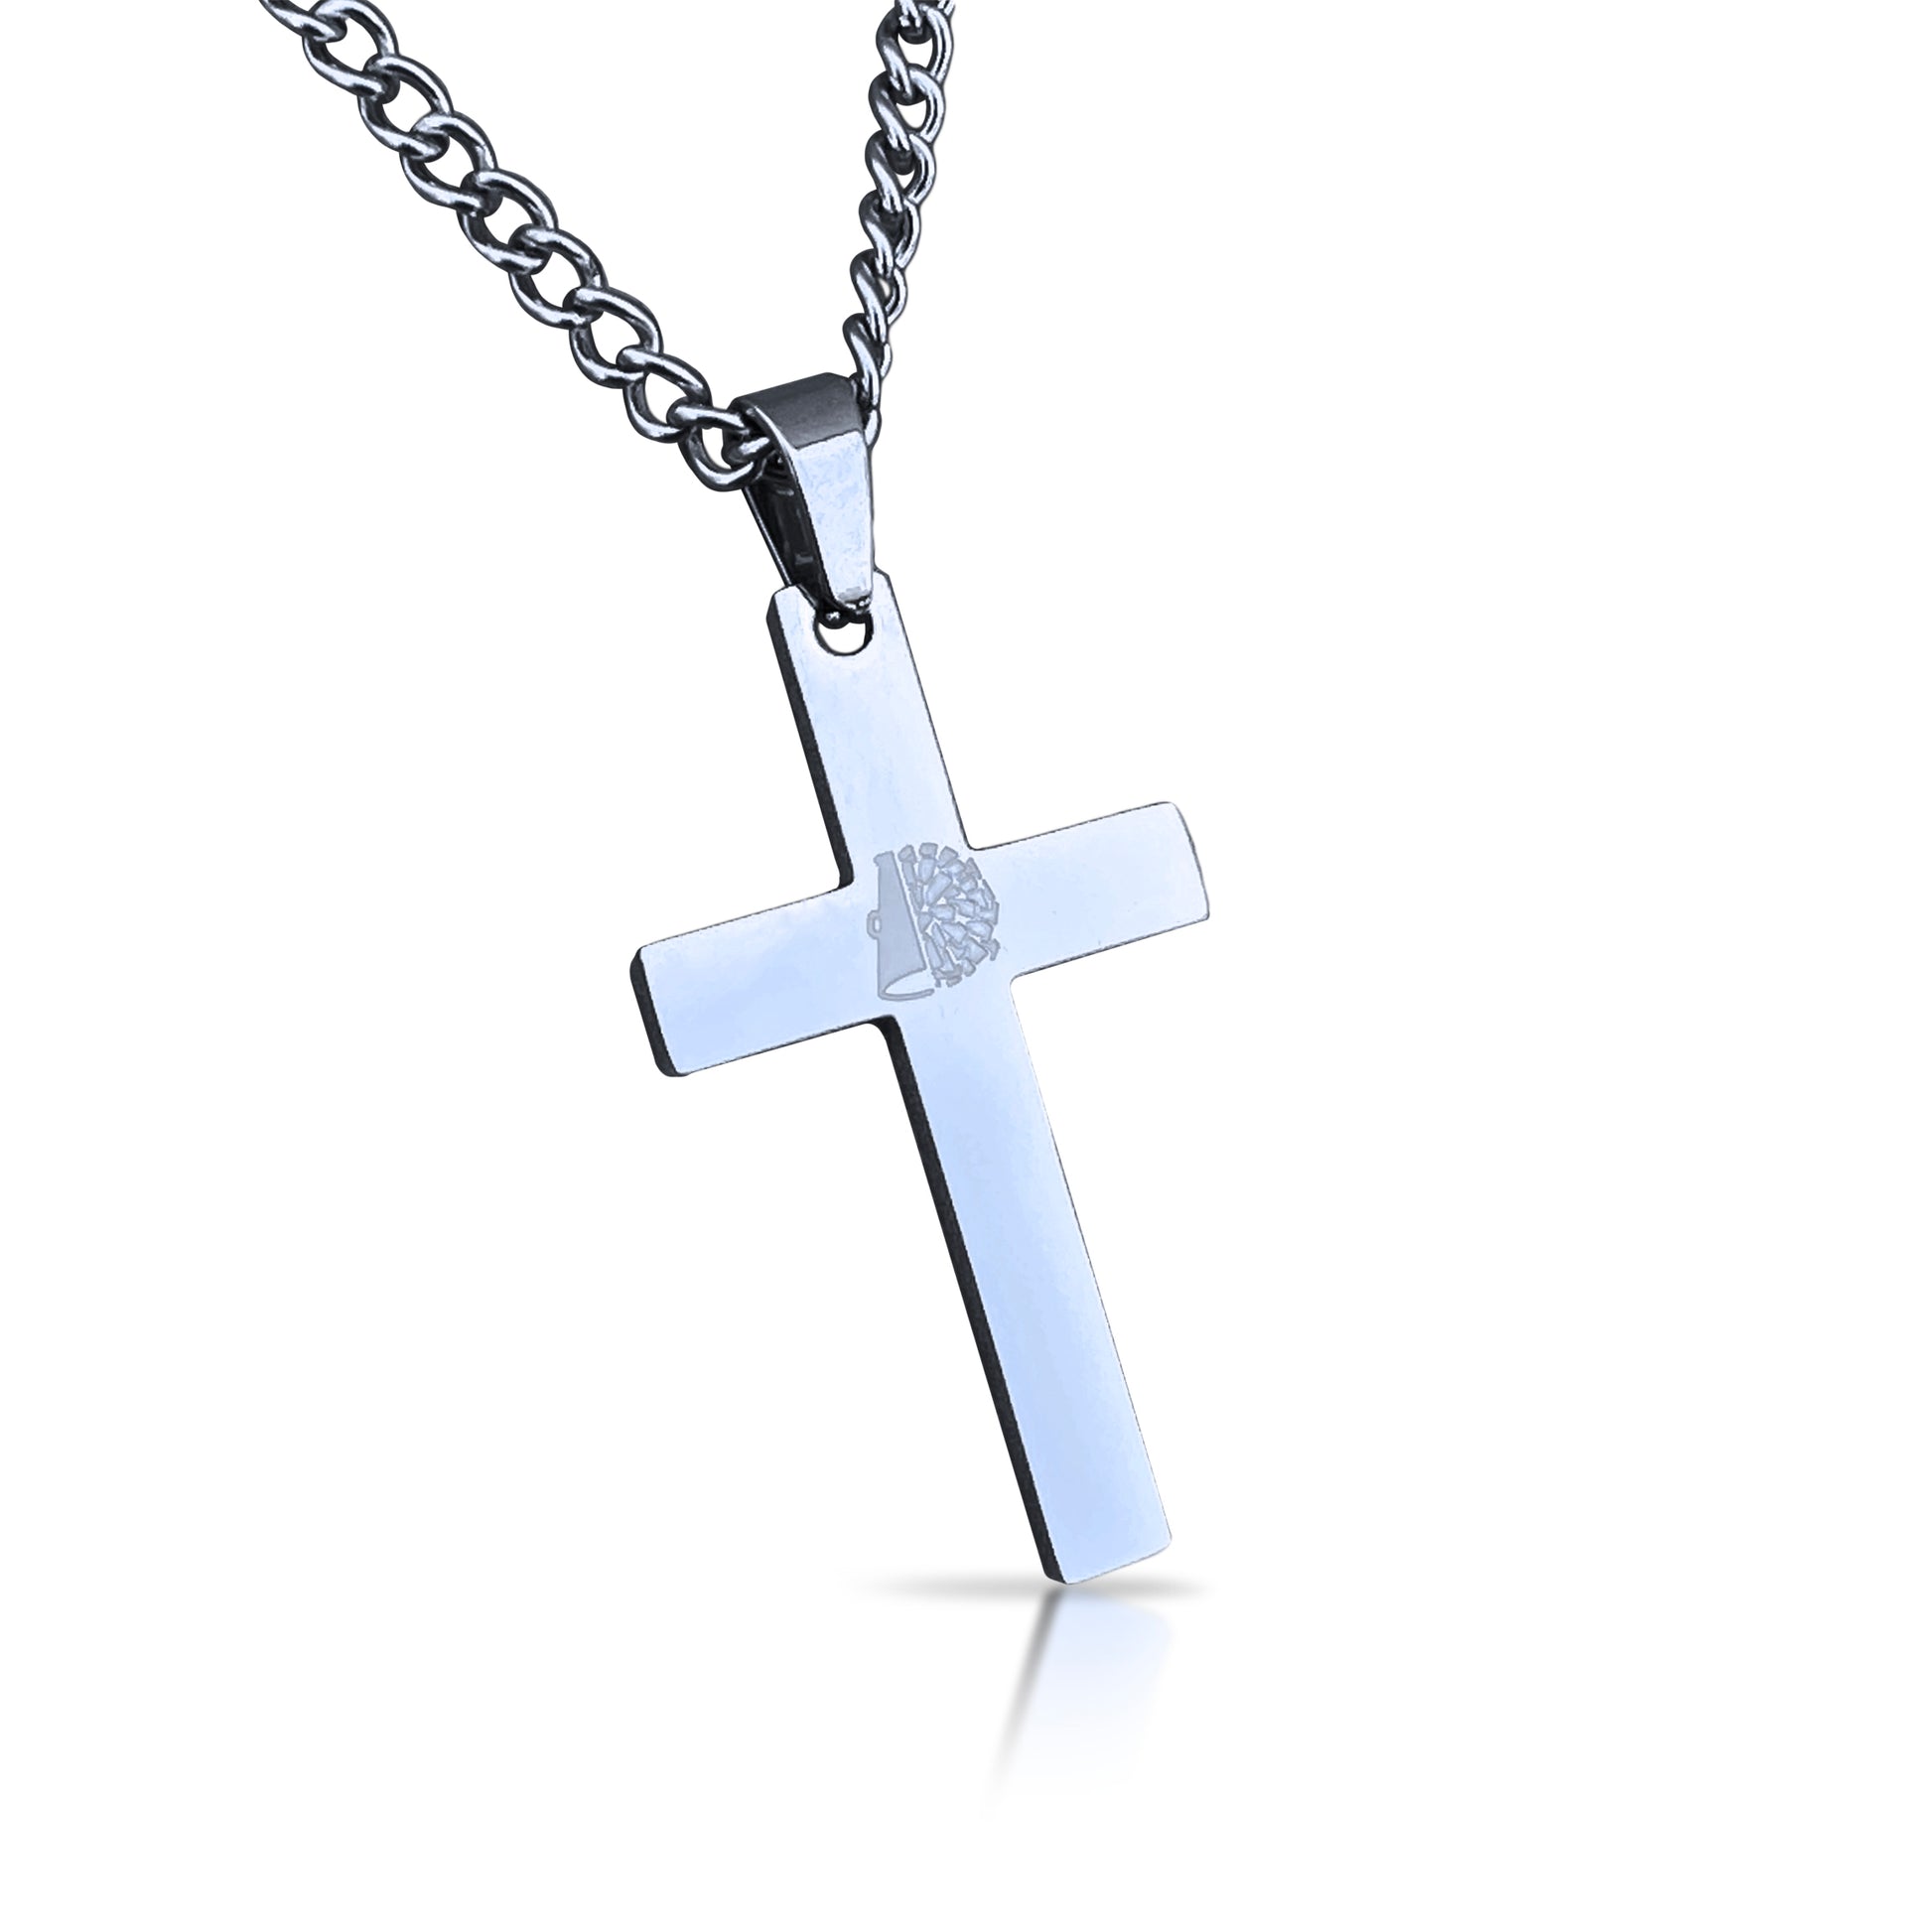 Cheerleading Cross Pendant With Chain Necklace - Stainless Steel